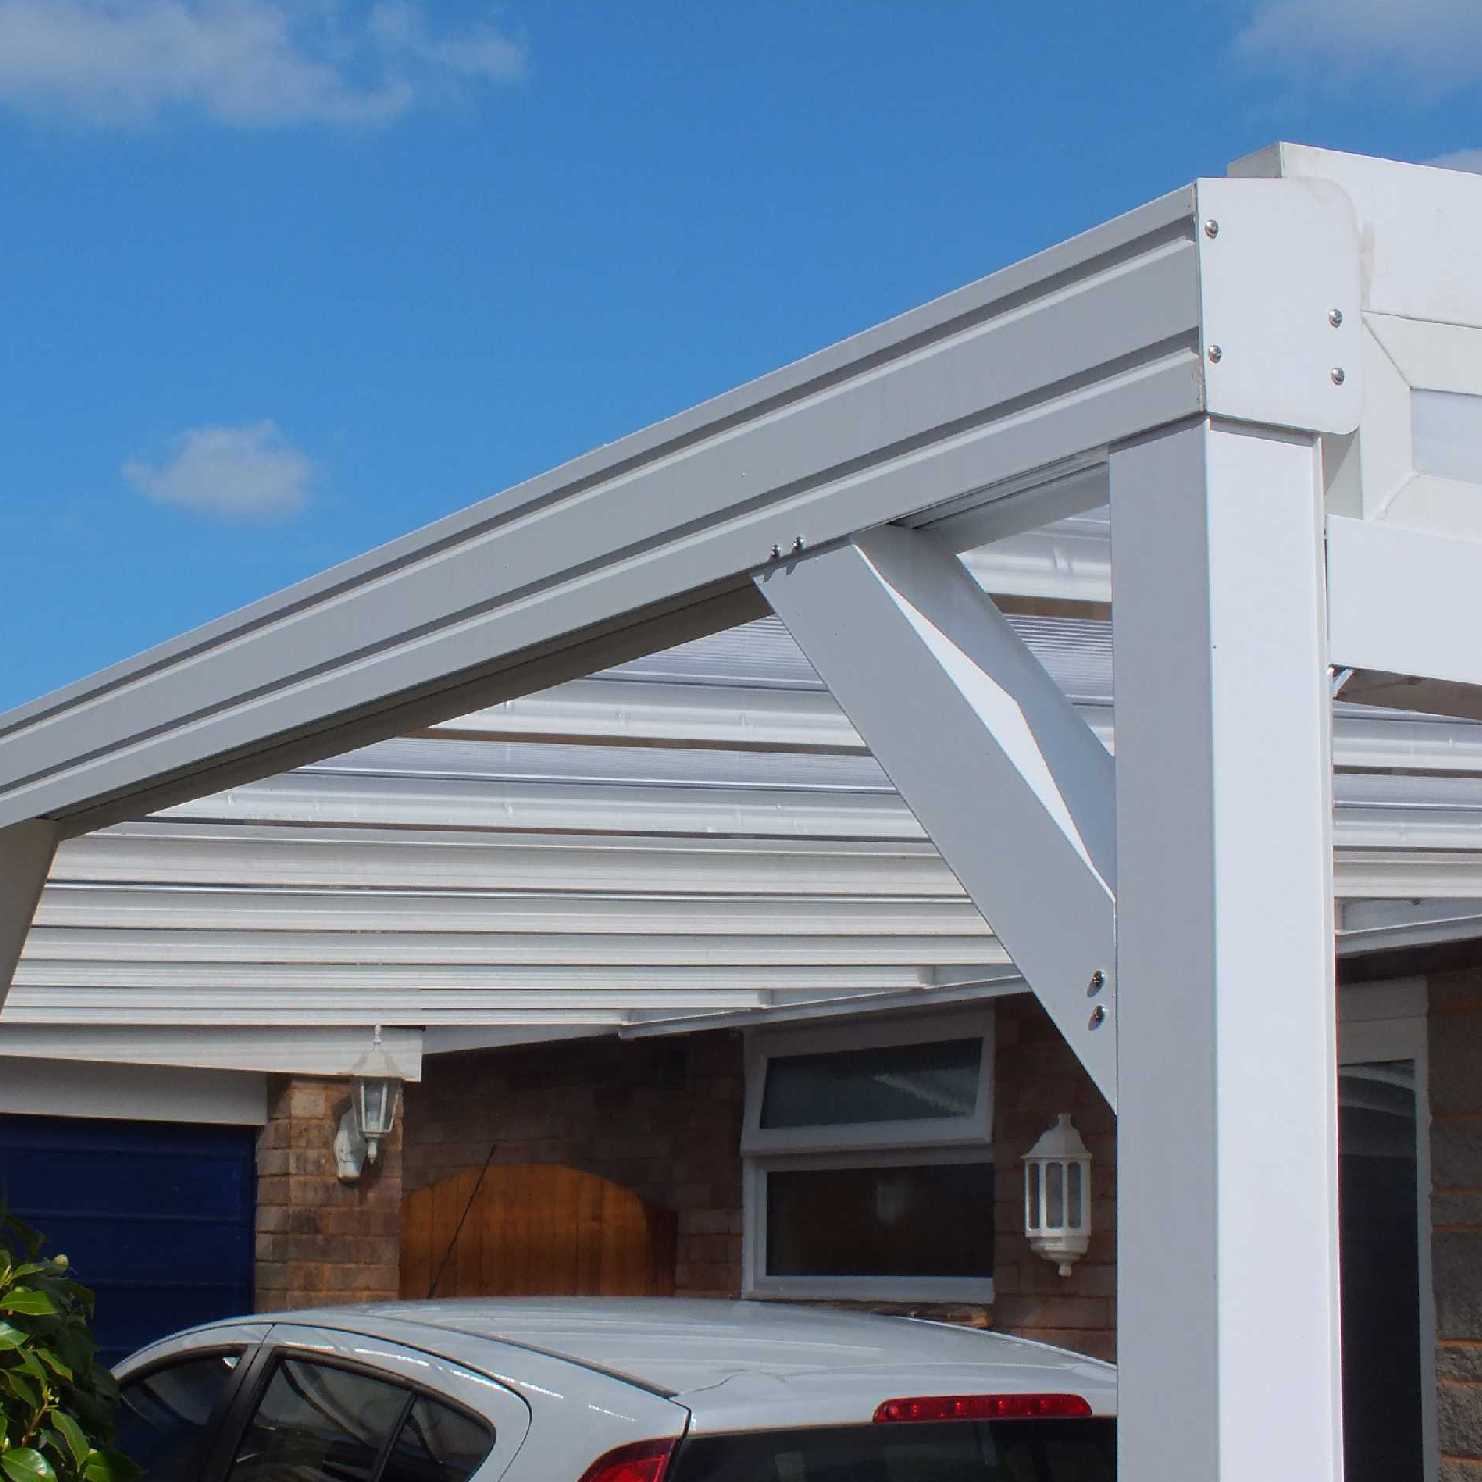 Buy Omega SmartLean-To Canopy, White with 16mm Polycarbonate Glazing - 9.5m (W) x 2.0m (P), (5) Supporting Posts online today